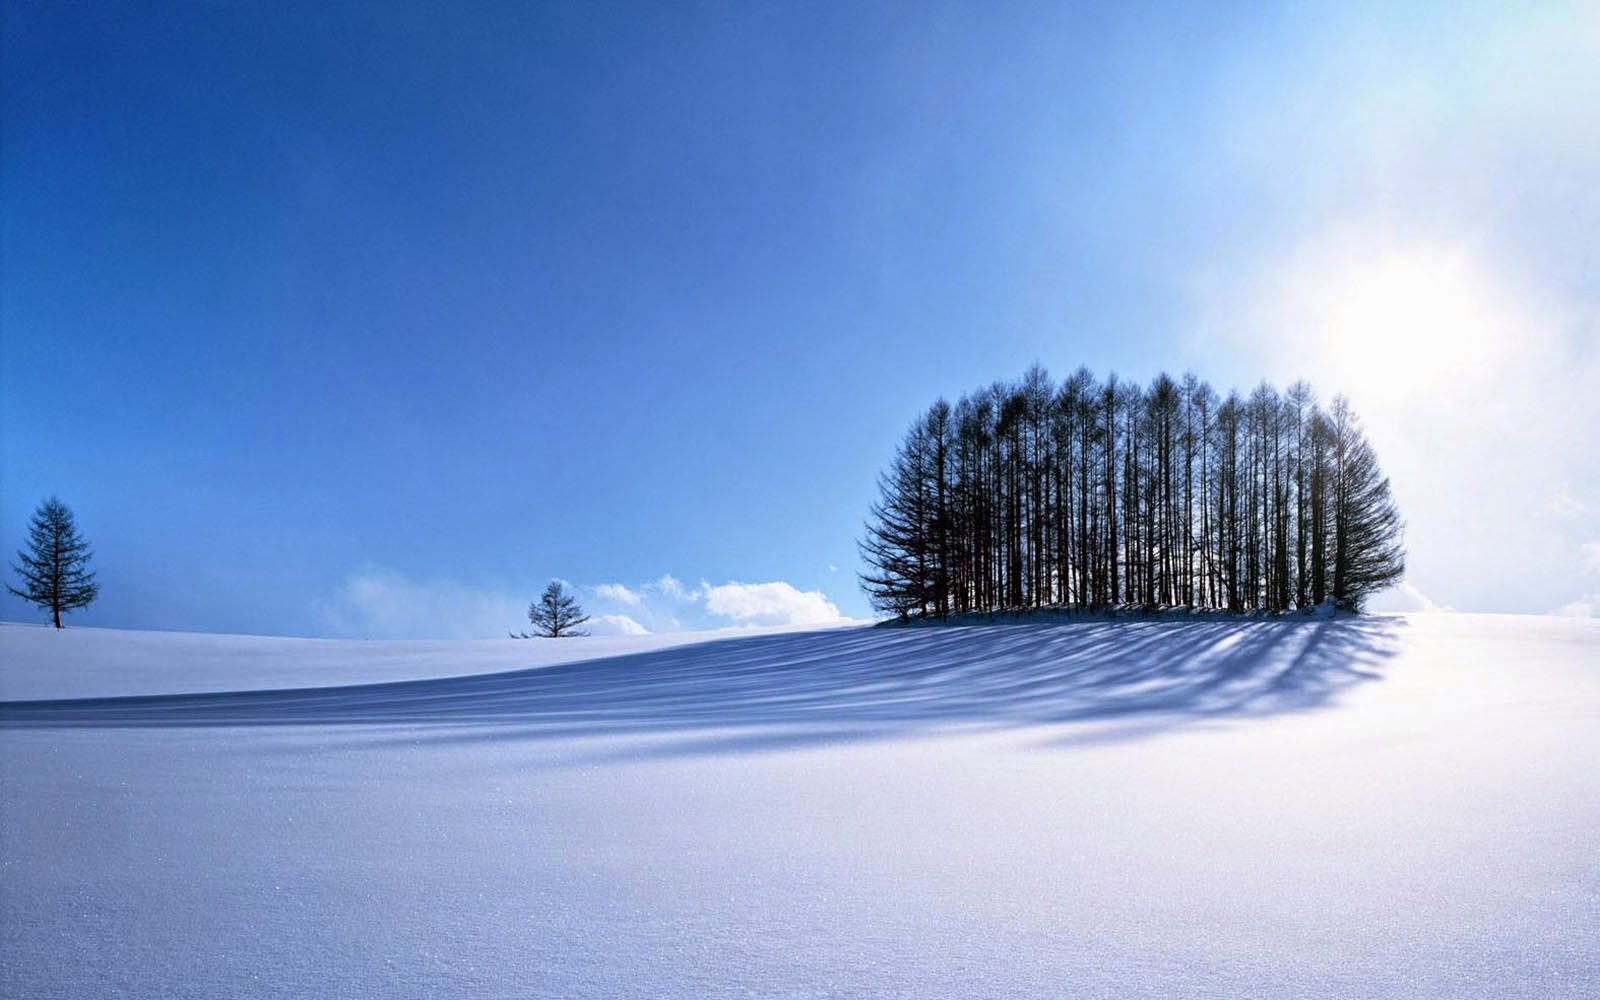 Winter Scenery Wallpaper Background Photos Image And Pictures For